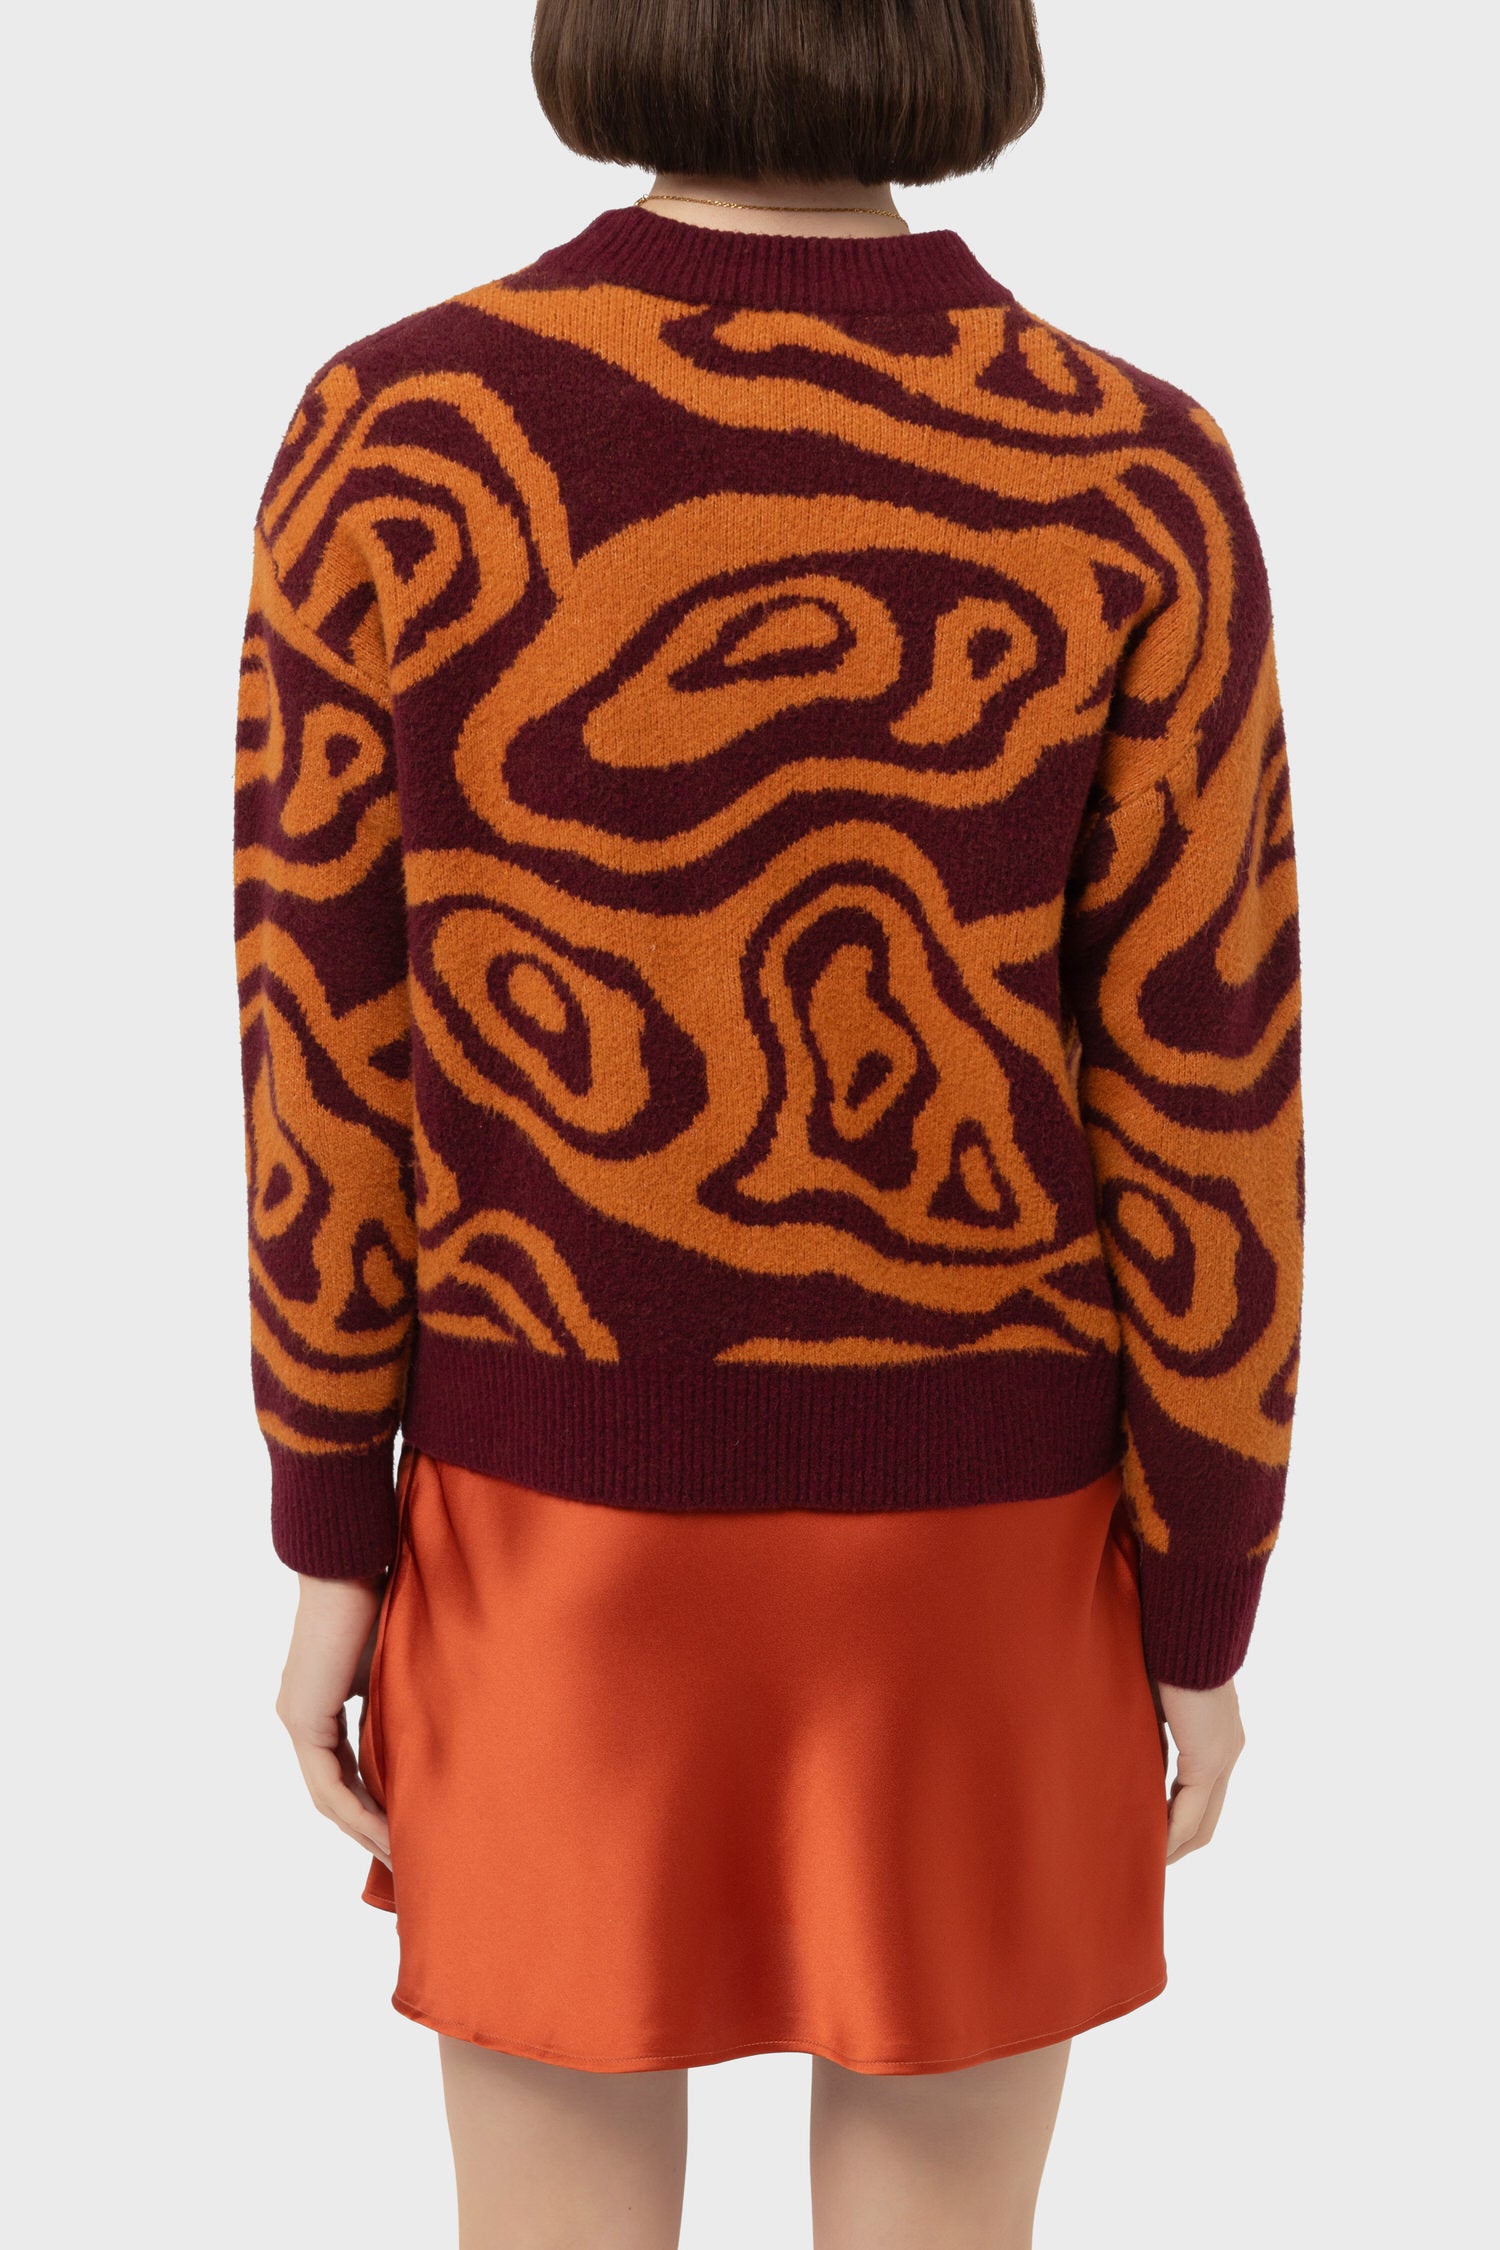 Women's Nice Things Isobars Jacquard Sweater in Wine Red